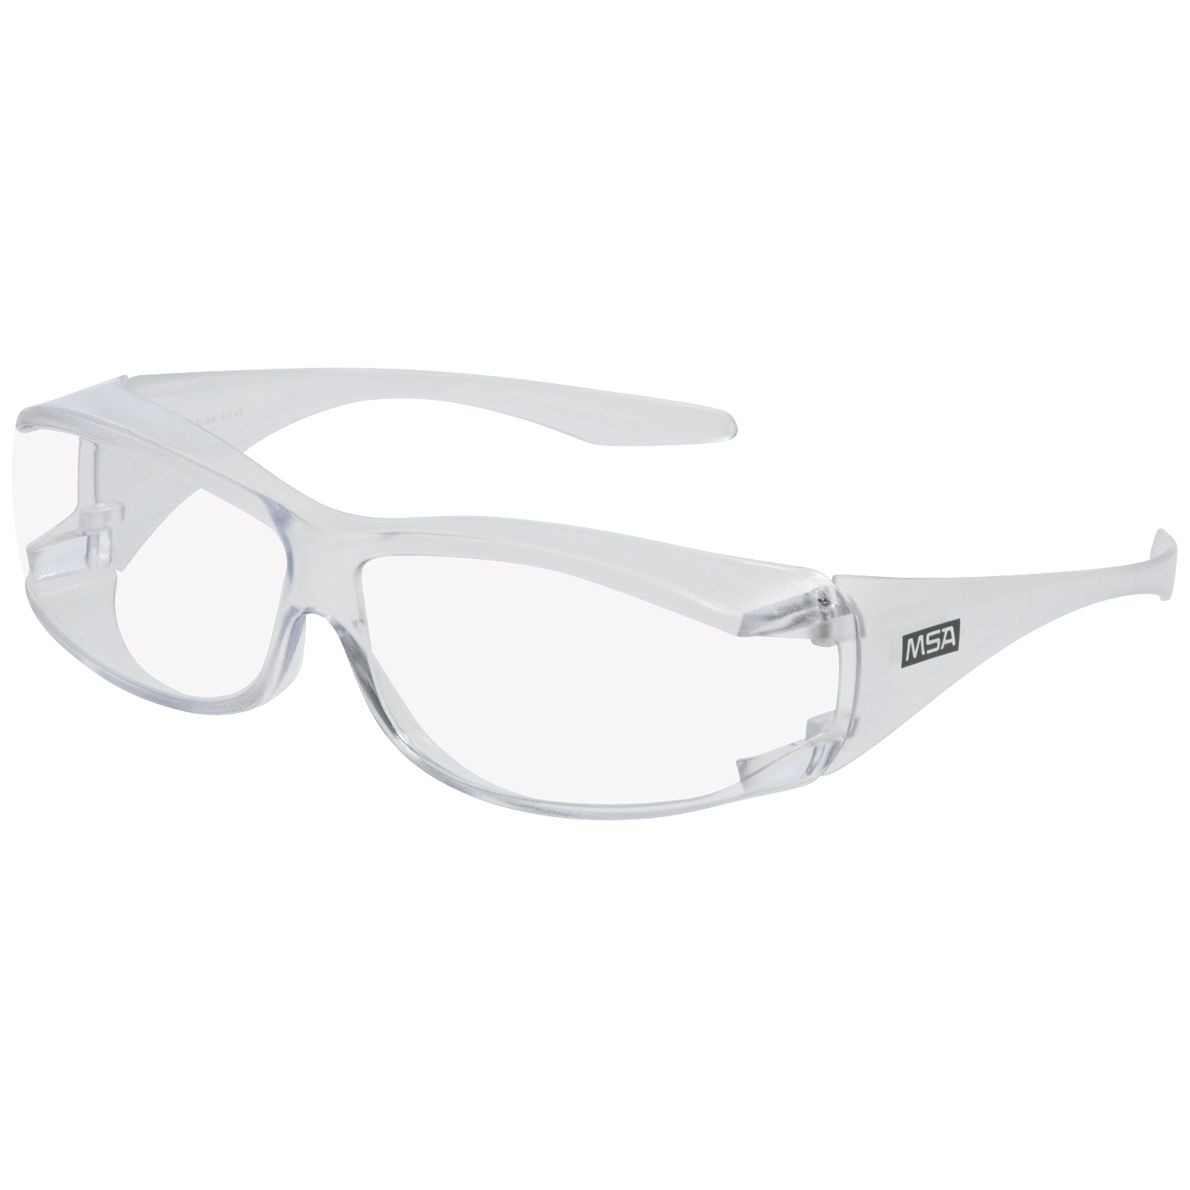 MSA OverG full view safety goggles - for spectacle wearers - scratch & fog resistant thanks to TuffStuff - EN 166/170 - White/Clear